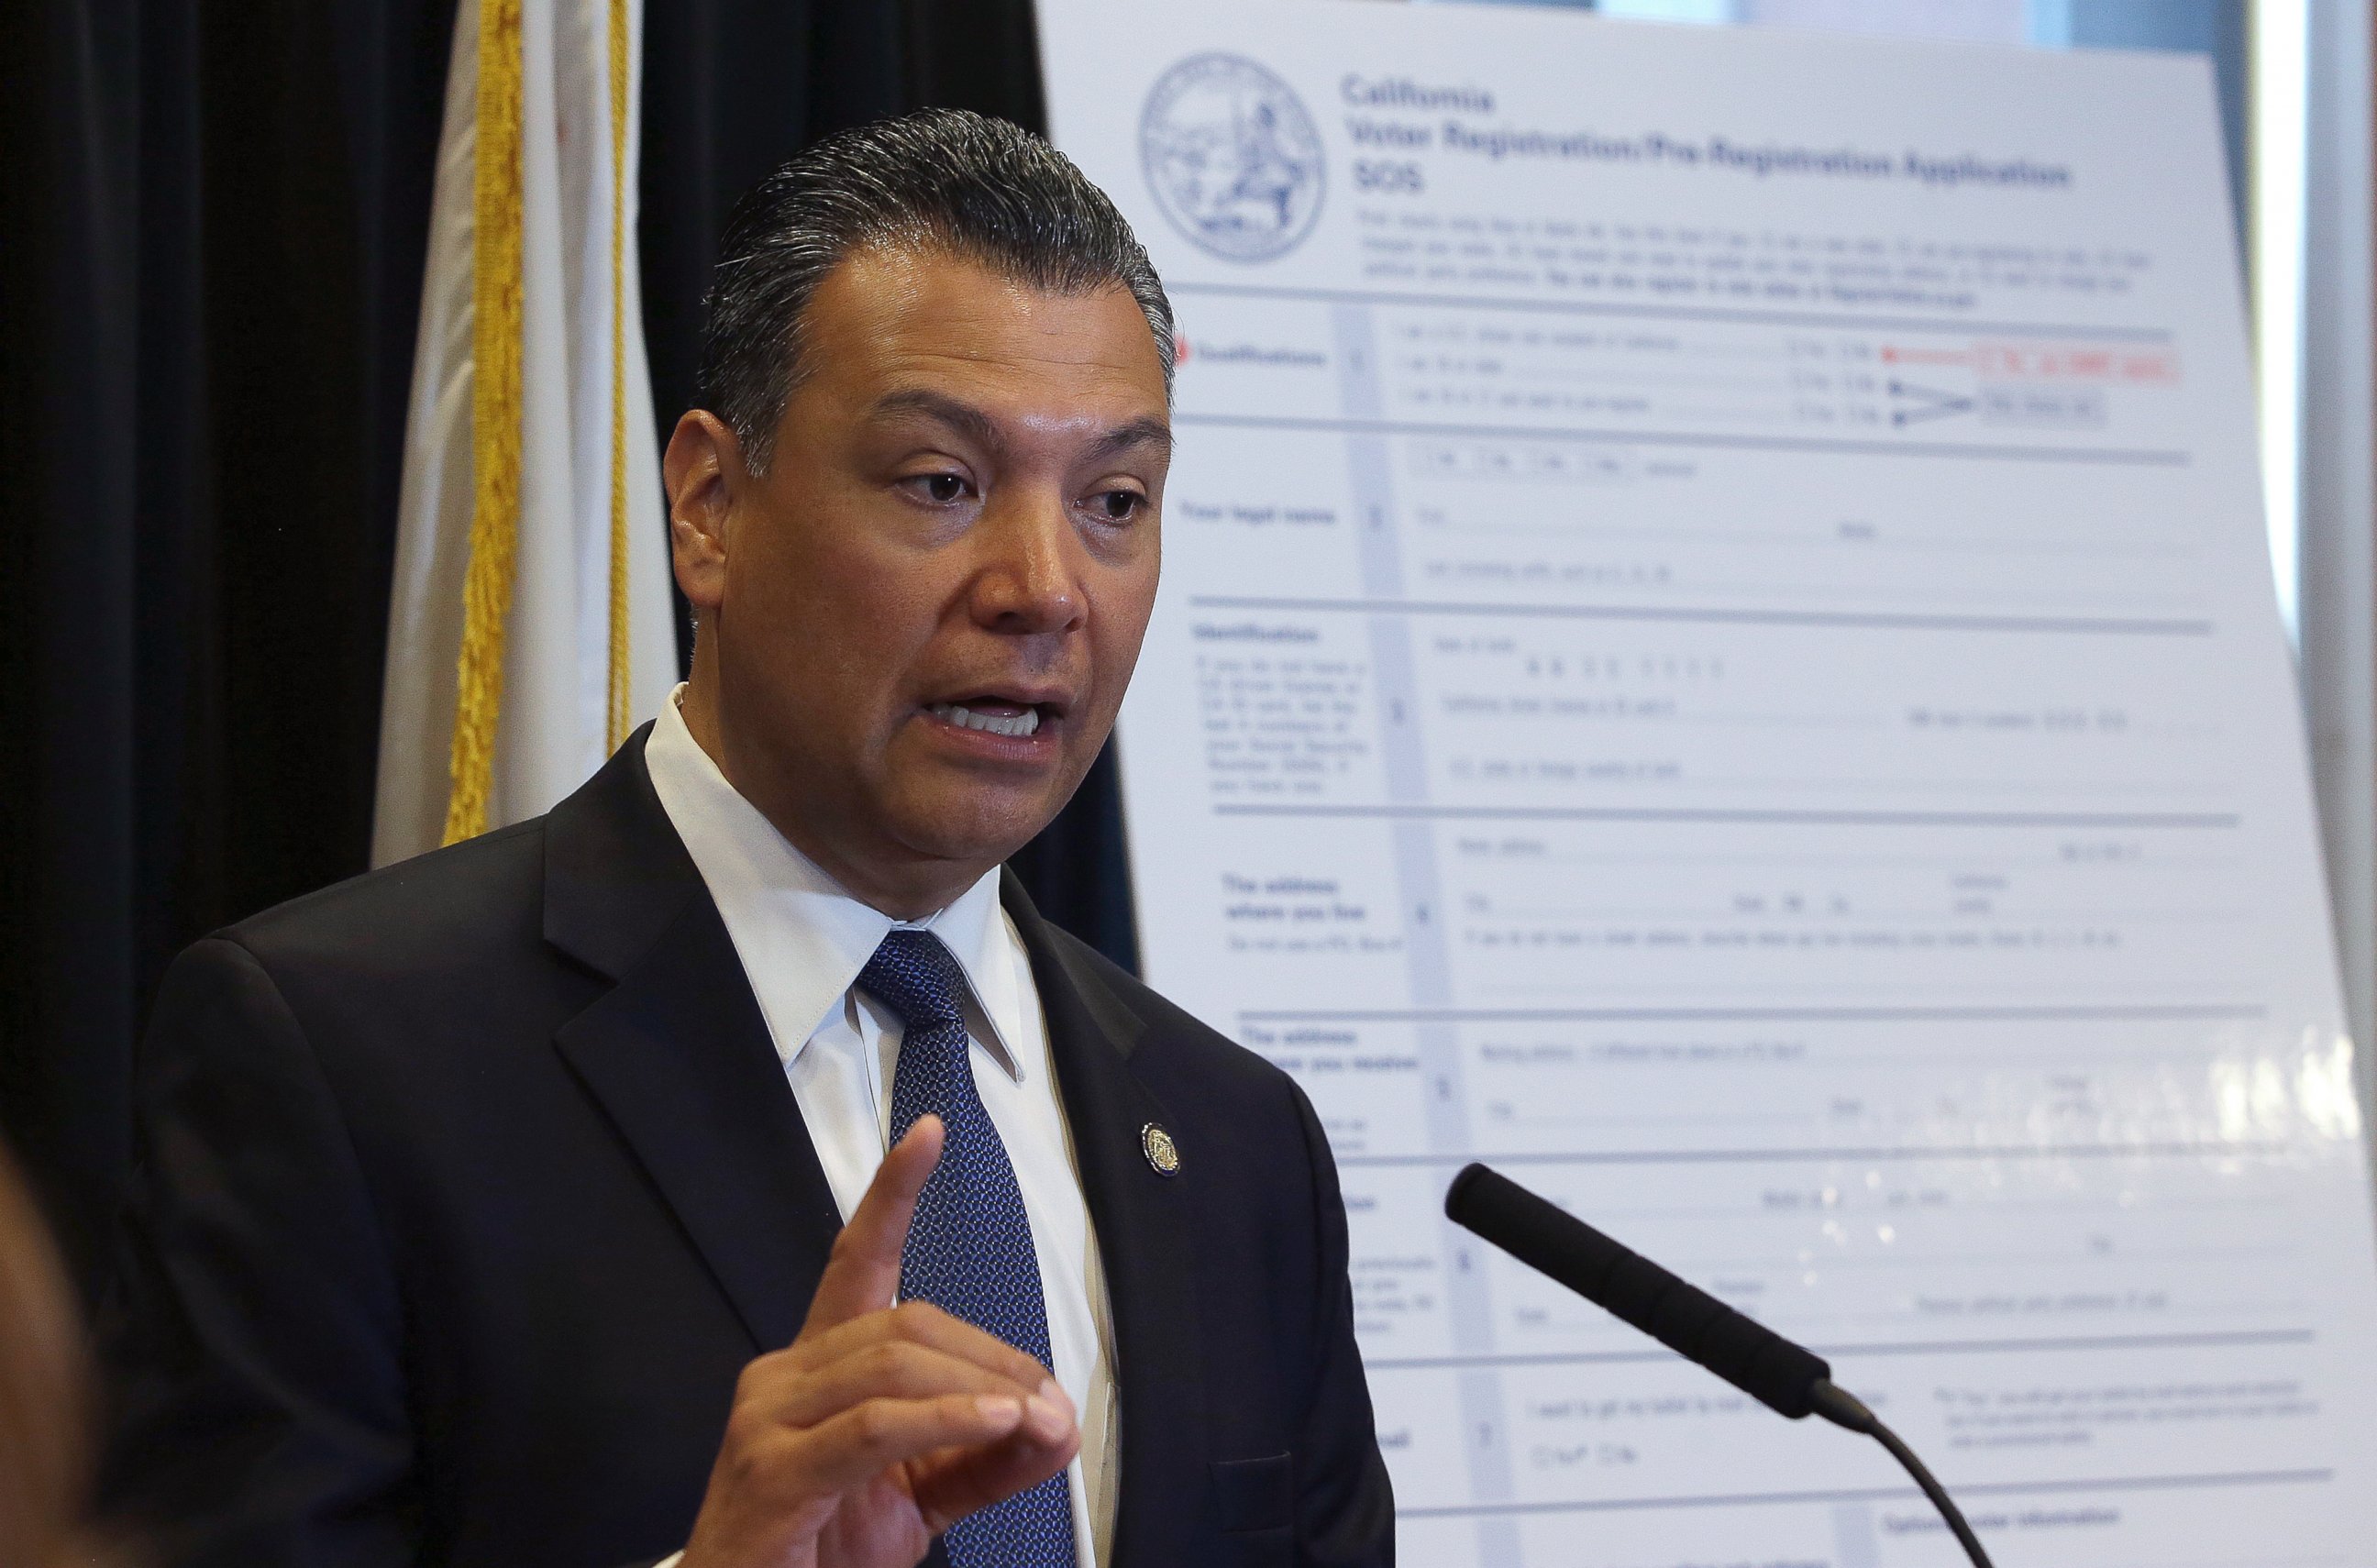 PHOTO: In this April 5, 2018, file photo, California Secretary of State Alex Padilla speaks in Sacramento, Calif. Padilla is urging Californians to oppose the Trump administration plan for a citizenship question on the 2020 census.